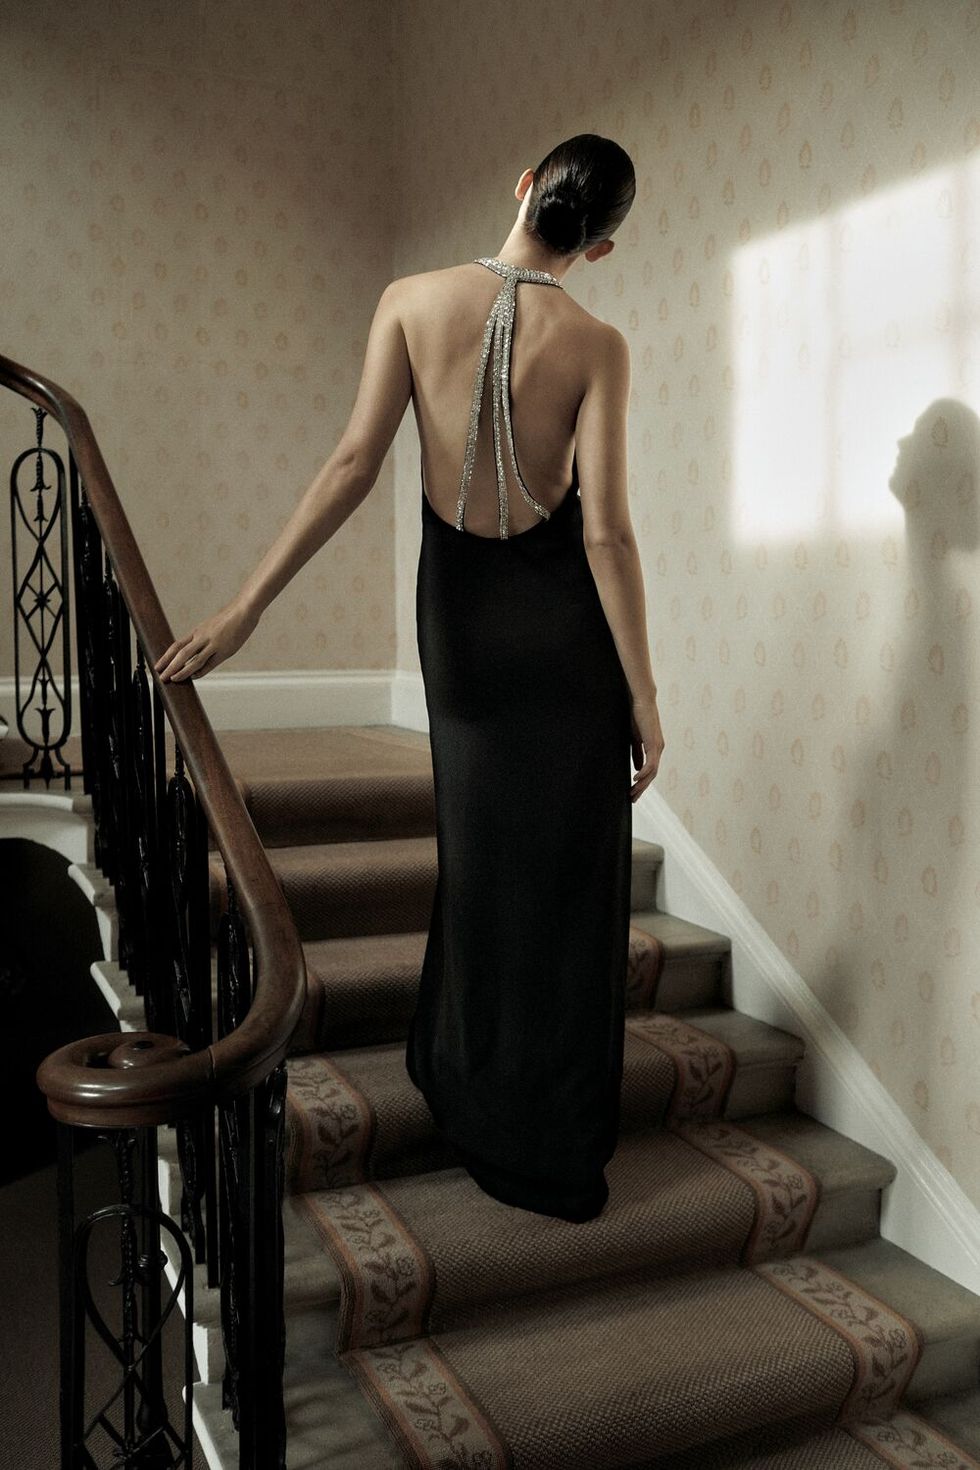 a person in a dress standing on a staircase